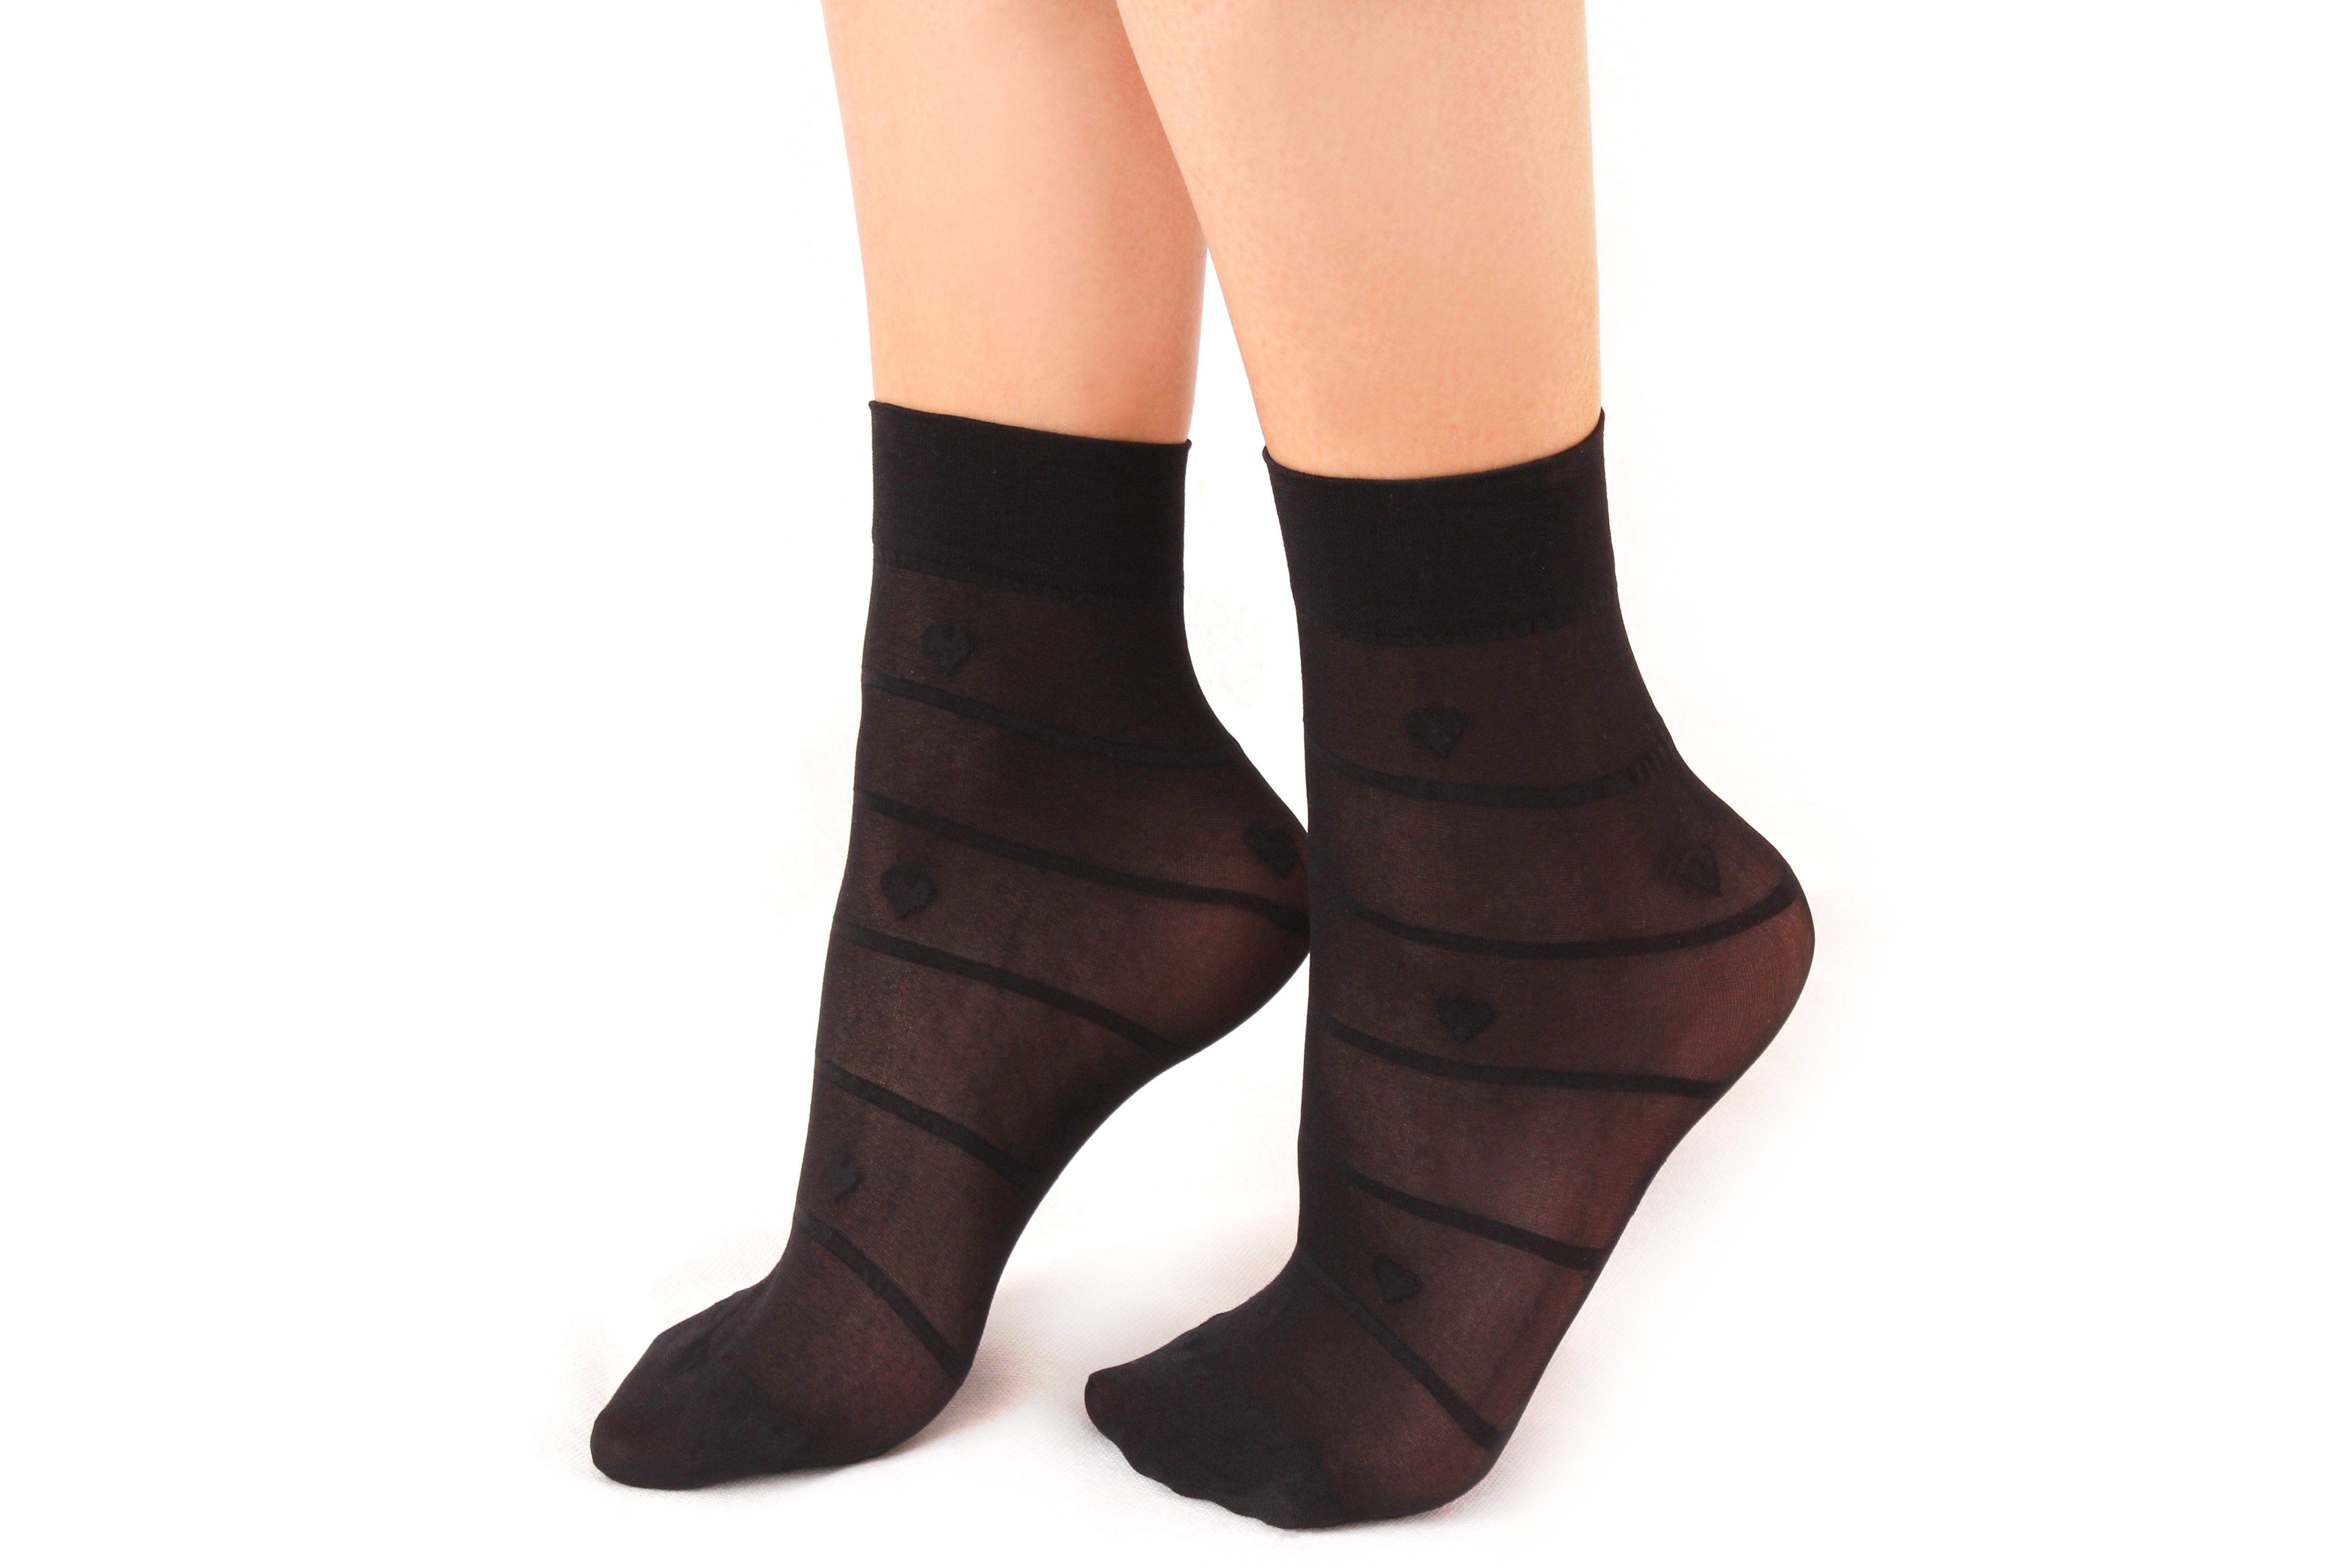 Heart Ankle High Tights